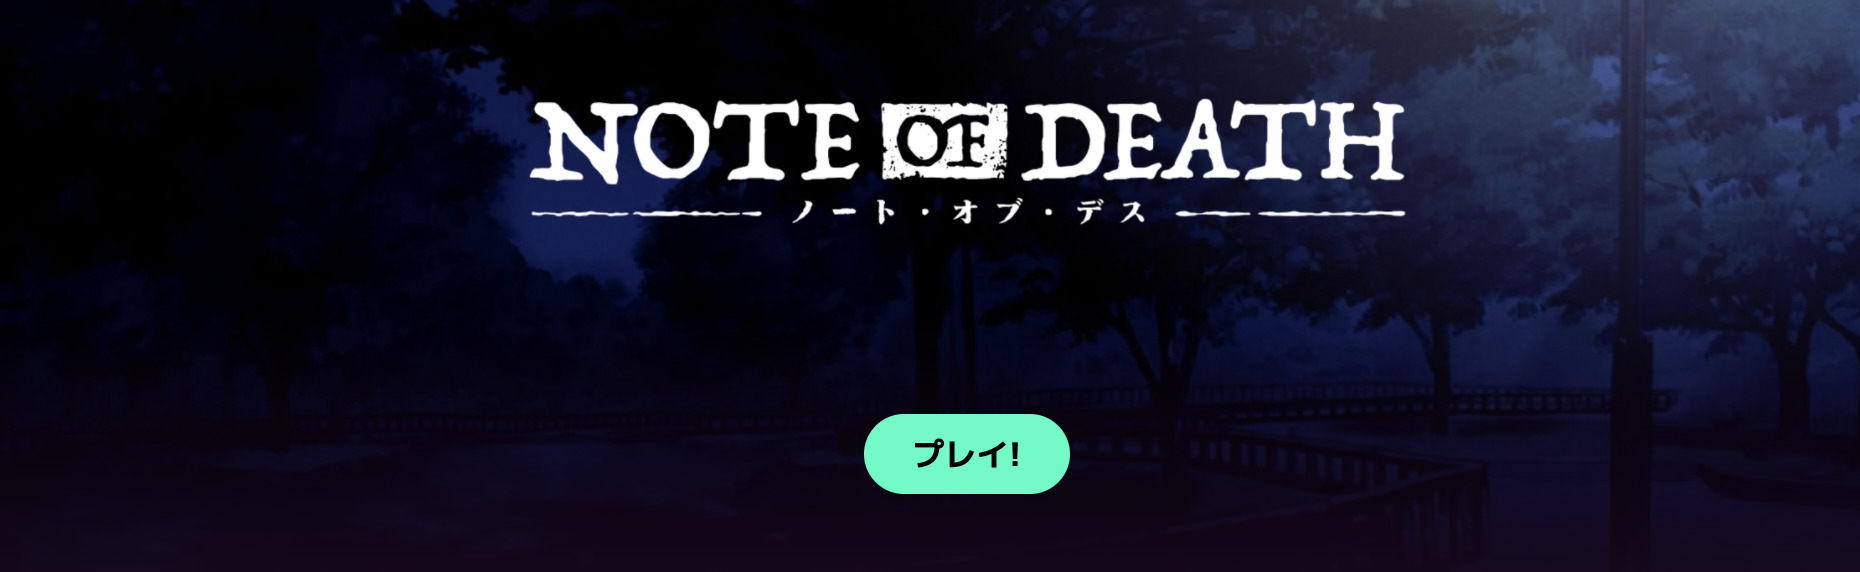 note of death